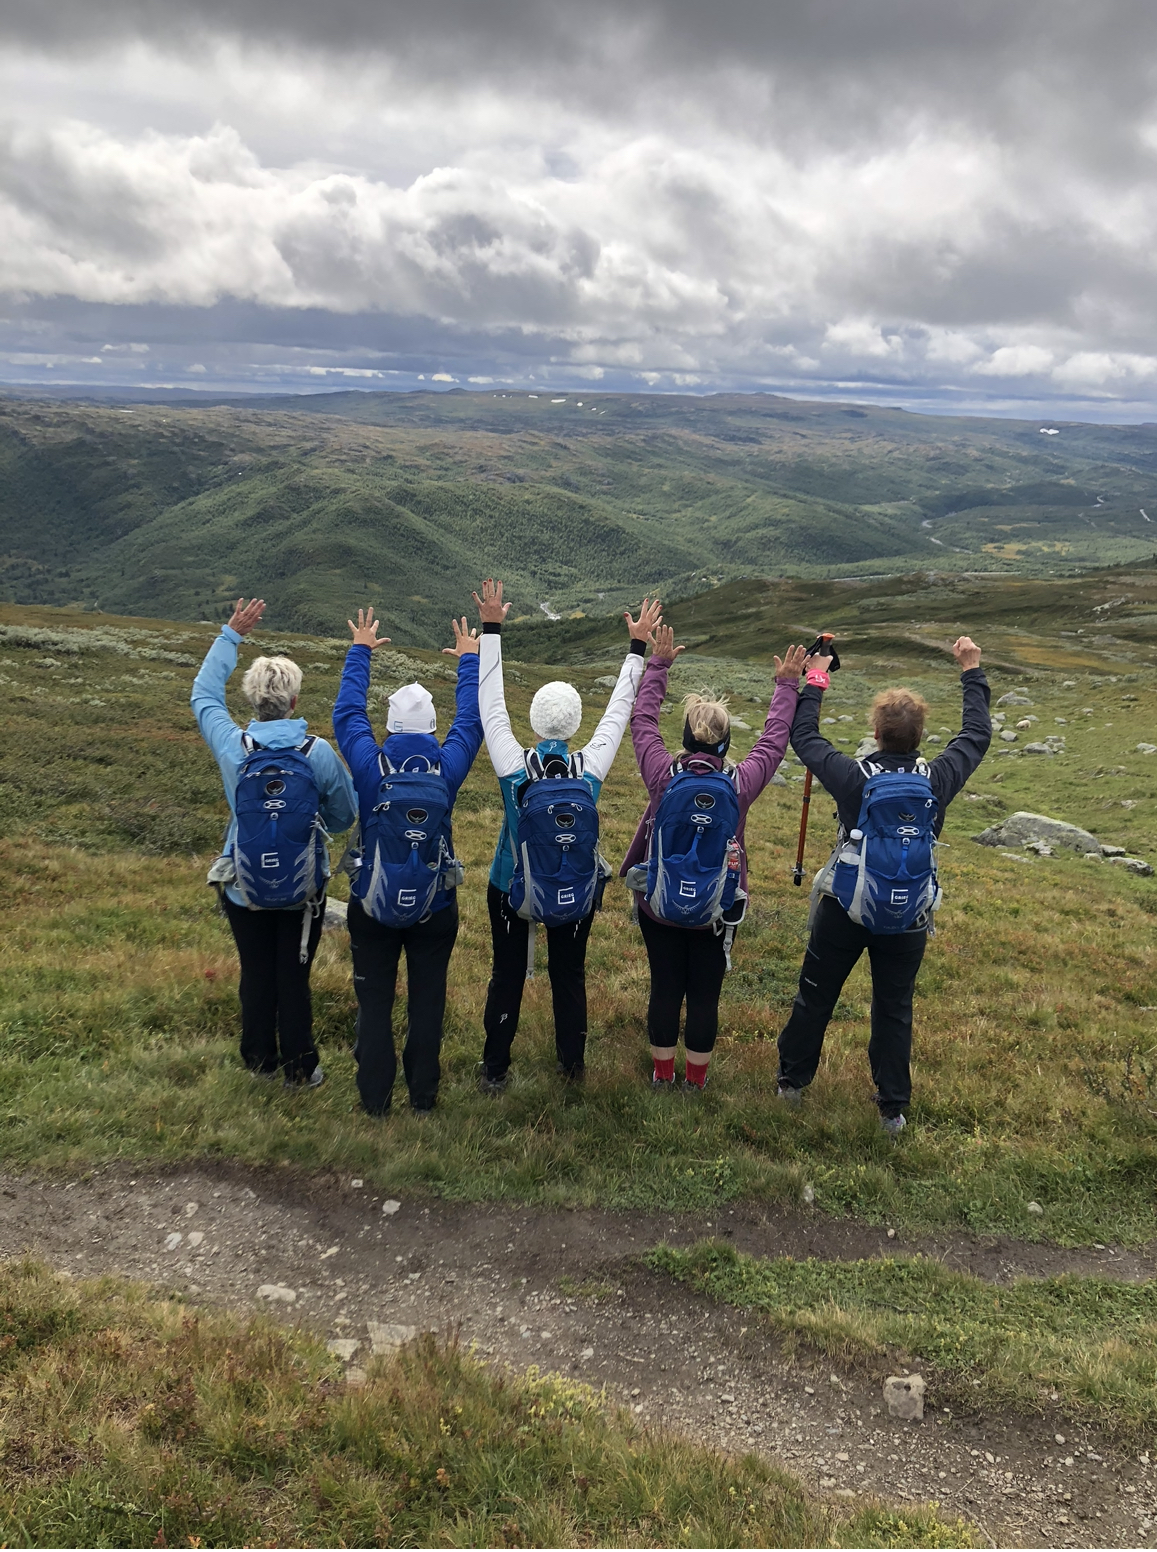 Five people putting their hands up while hiking on a mountain.